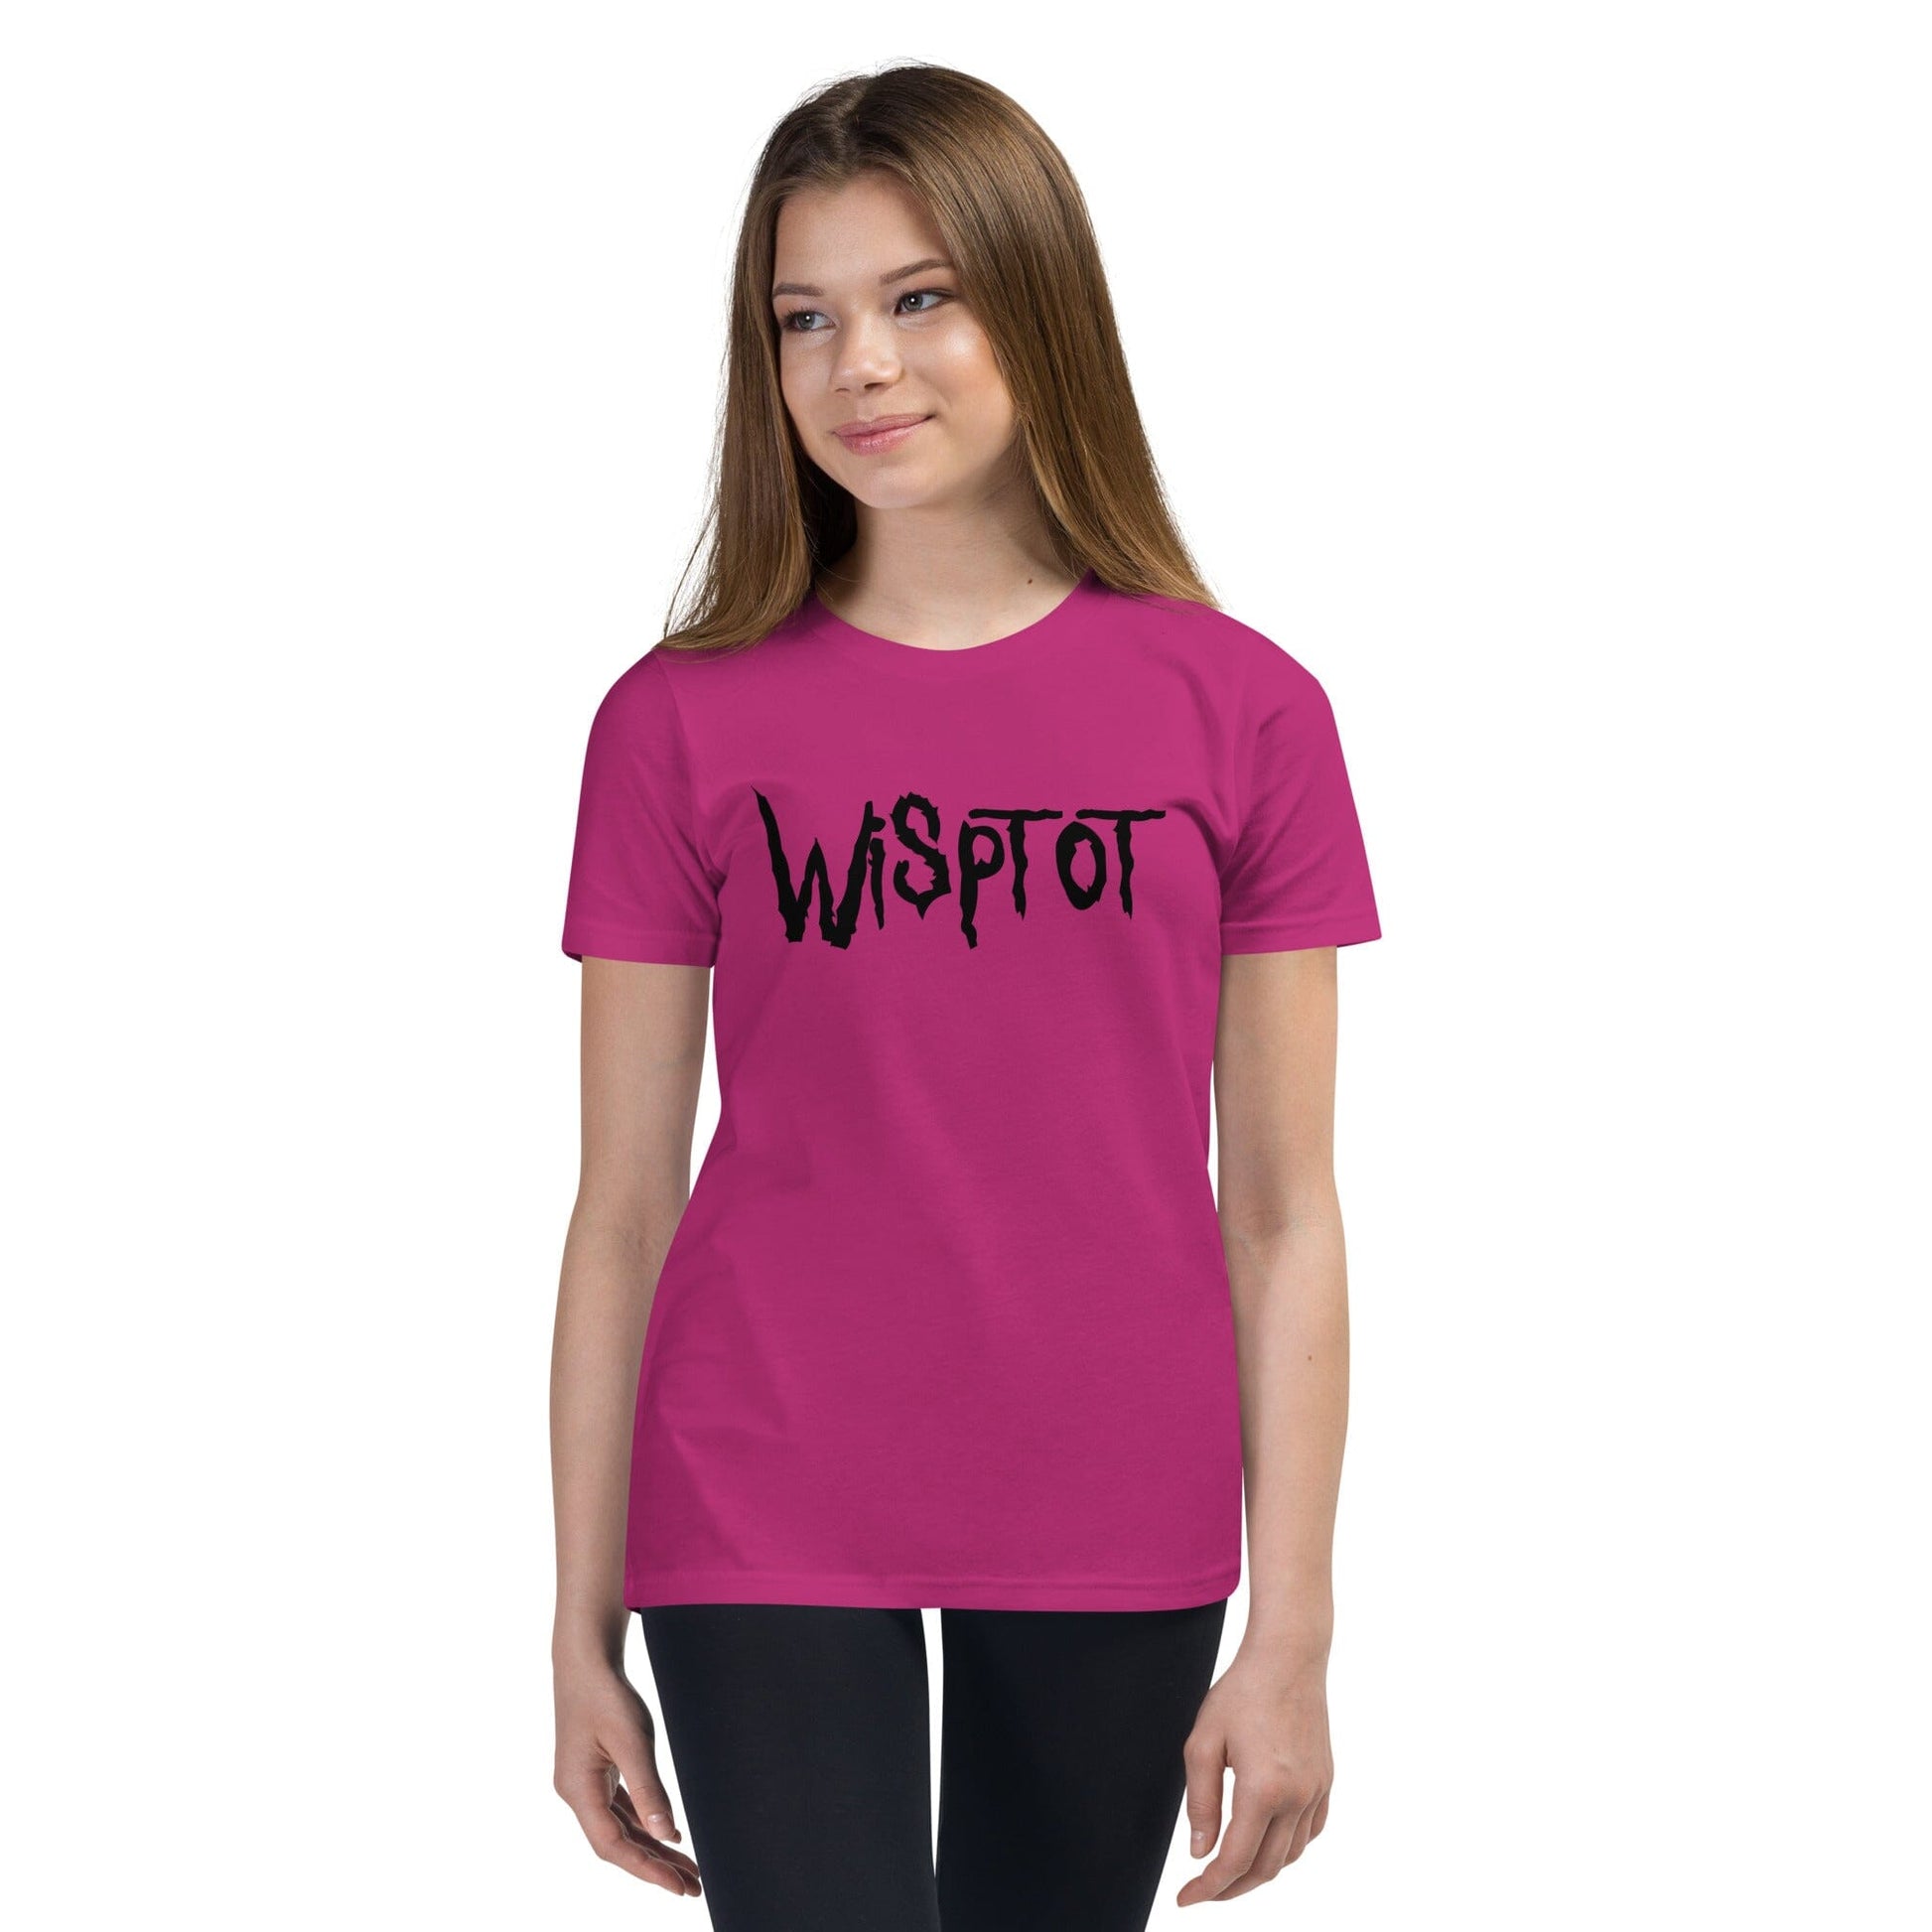 WispTot YOUTH T-Shirt [Unfoiled] (All net proceeds go to equally to Kitty CrusAIDe and Rags to Riches Animal Rescue) JoyousJoyfulJoyness Berry S 